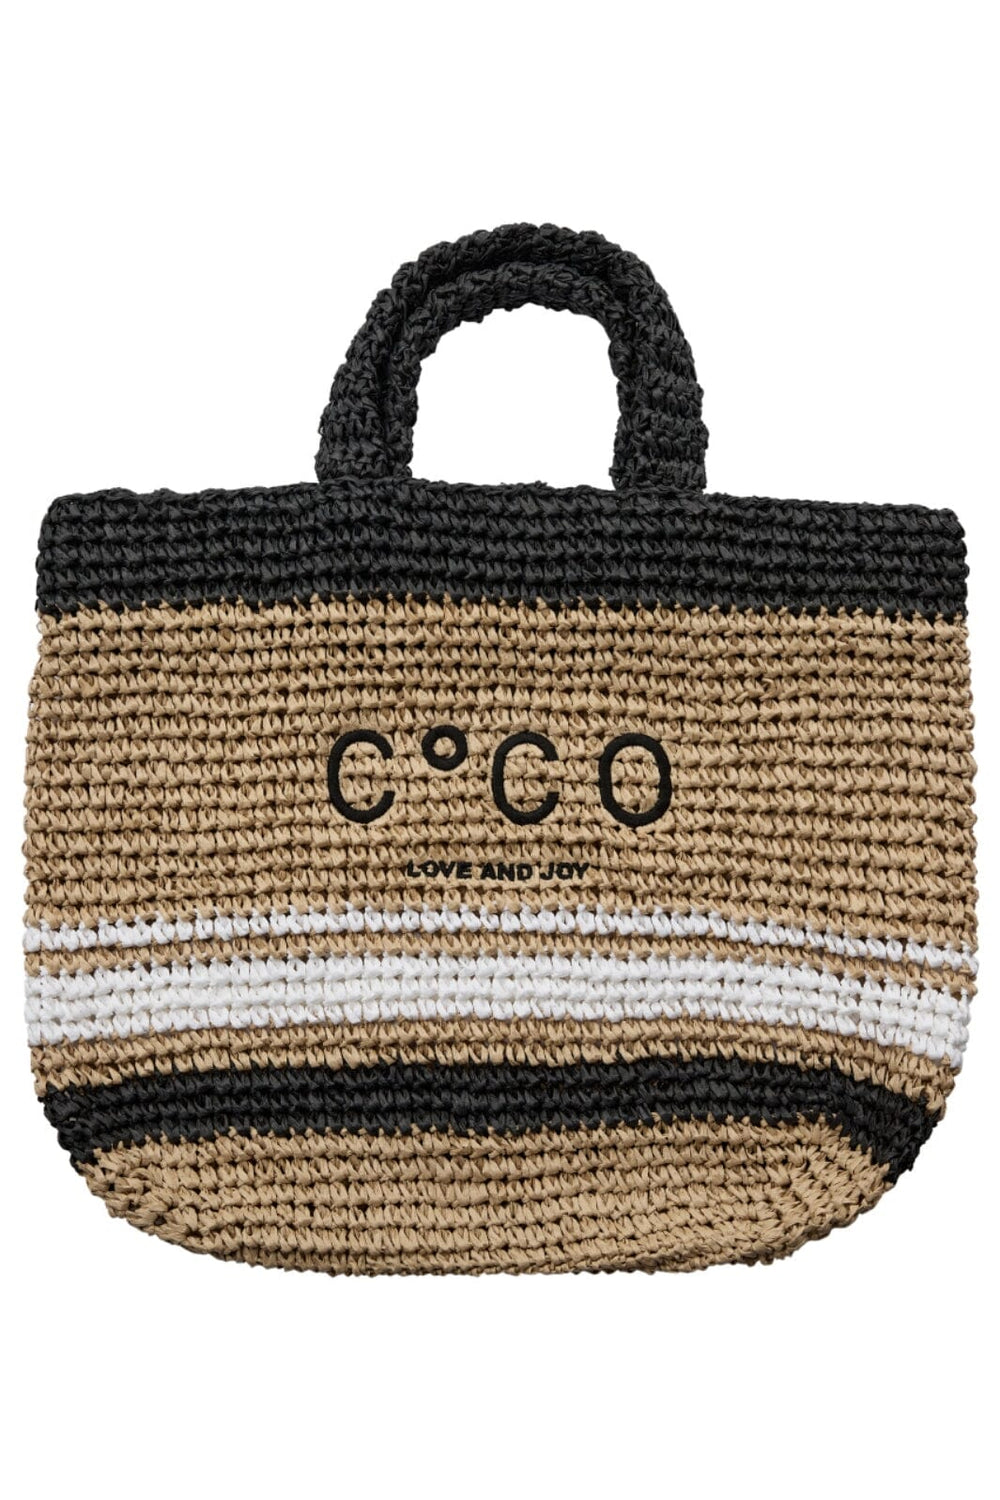 Co´couture - Cococc Bag 39016 - 4085 Straw 